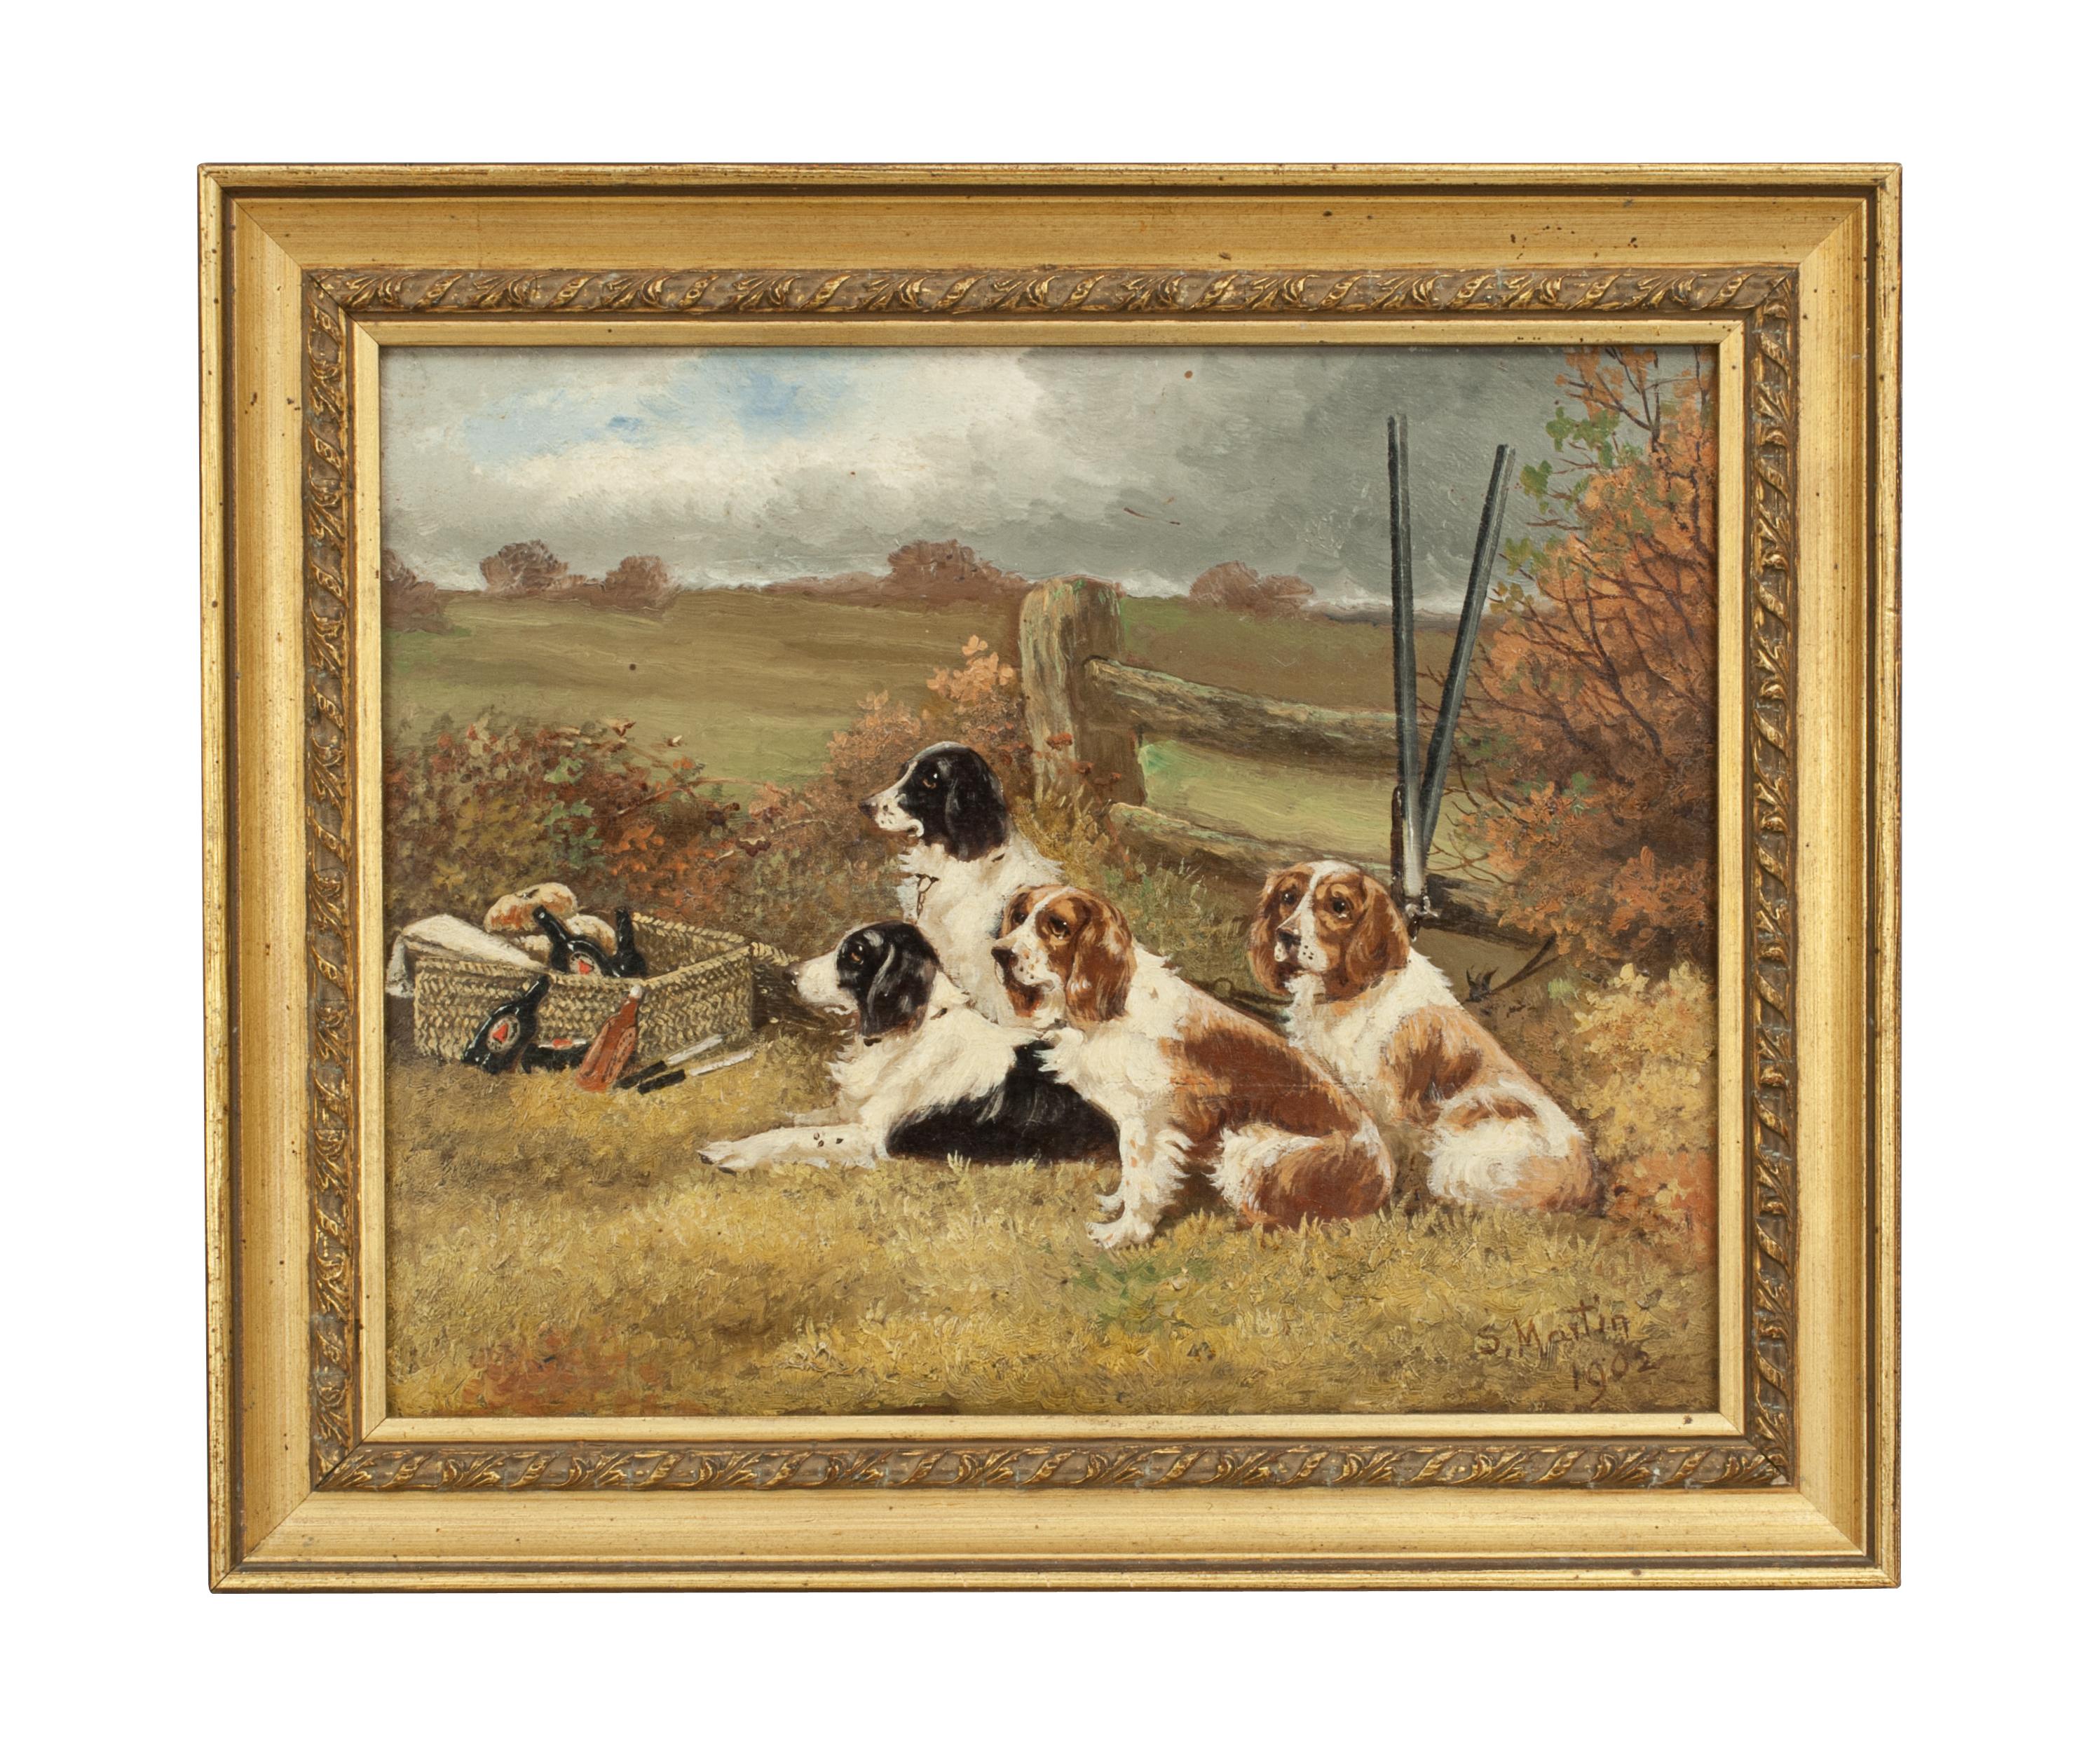 Pair of signed oil paintings of gun dogs.
A nice small pair of oil on board paintings of hunting gun dogs, Spaniels. Both signed by British artist Sylvester Martin, dated 1902. The pair of field Springer spaniel oil paintings have undeniable charm,